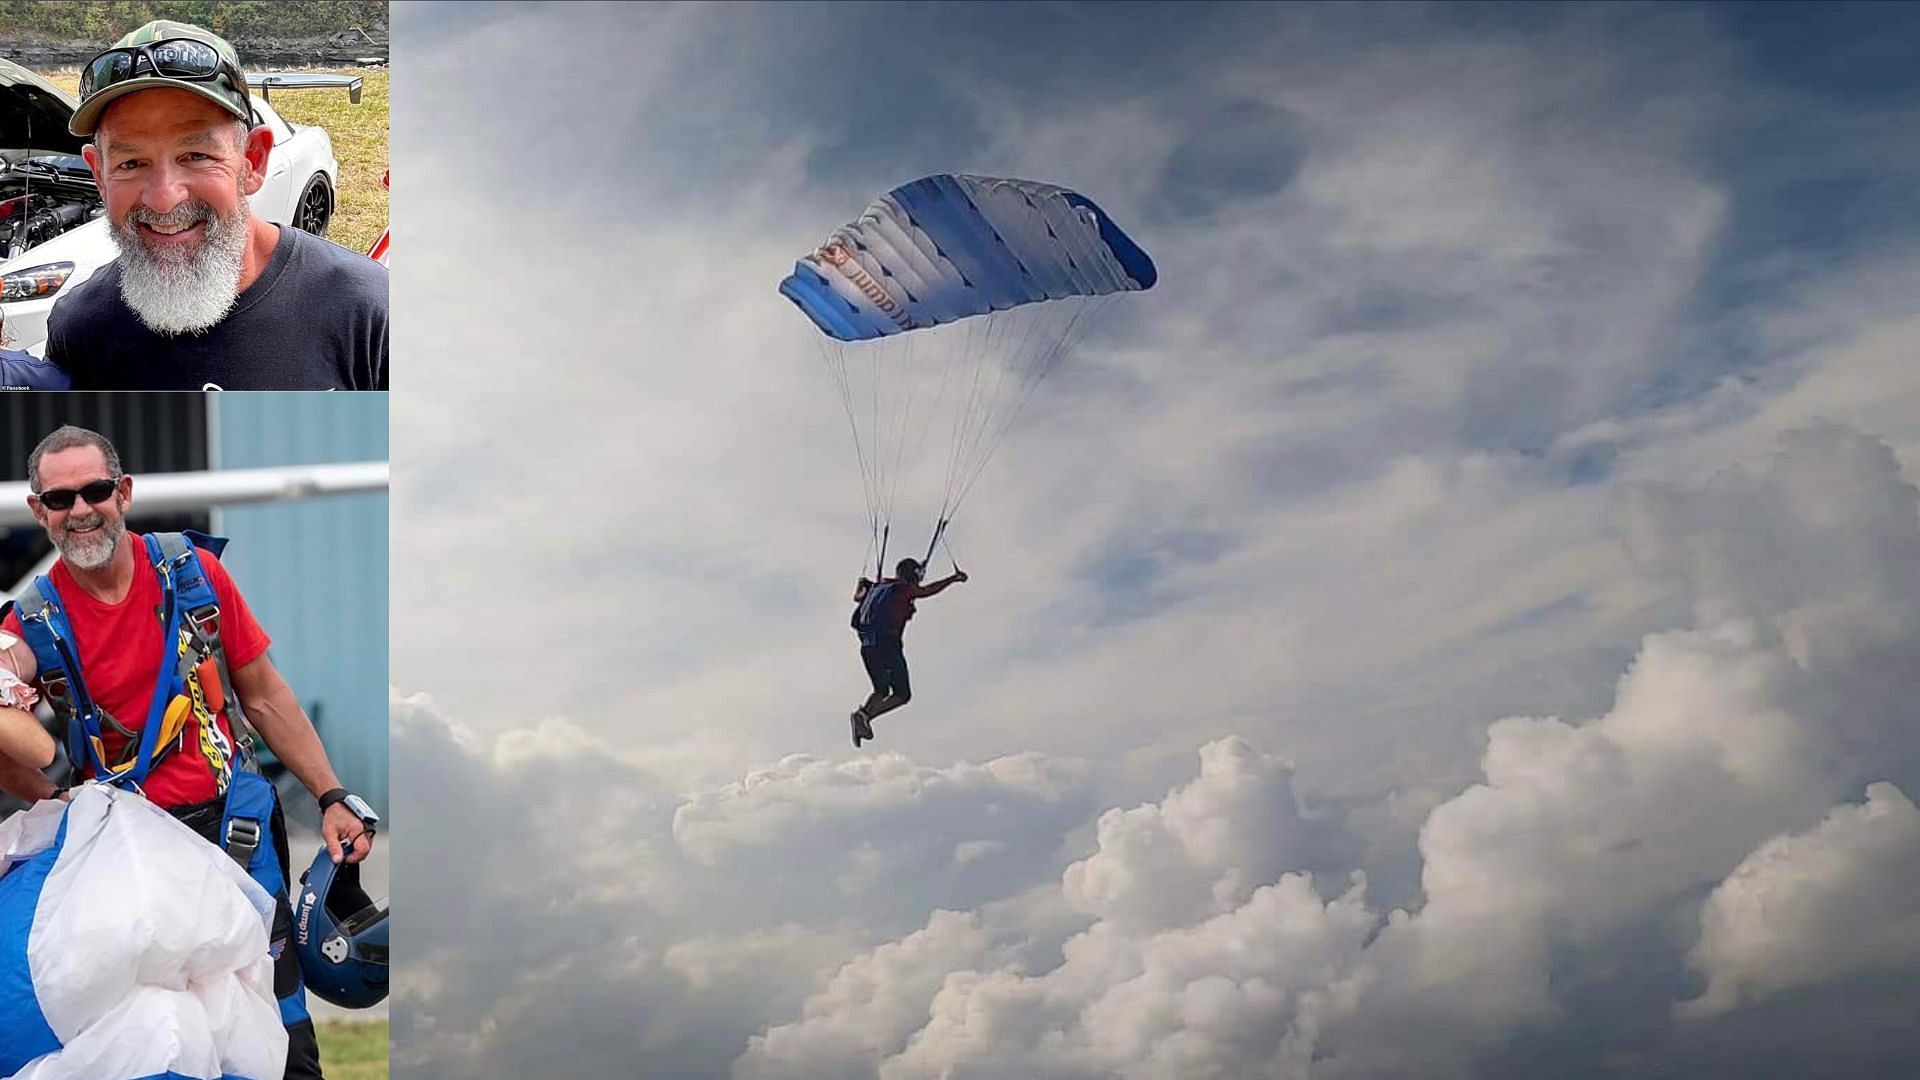 Tennessee skydiver dies in shocking video in front of horrified spectators